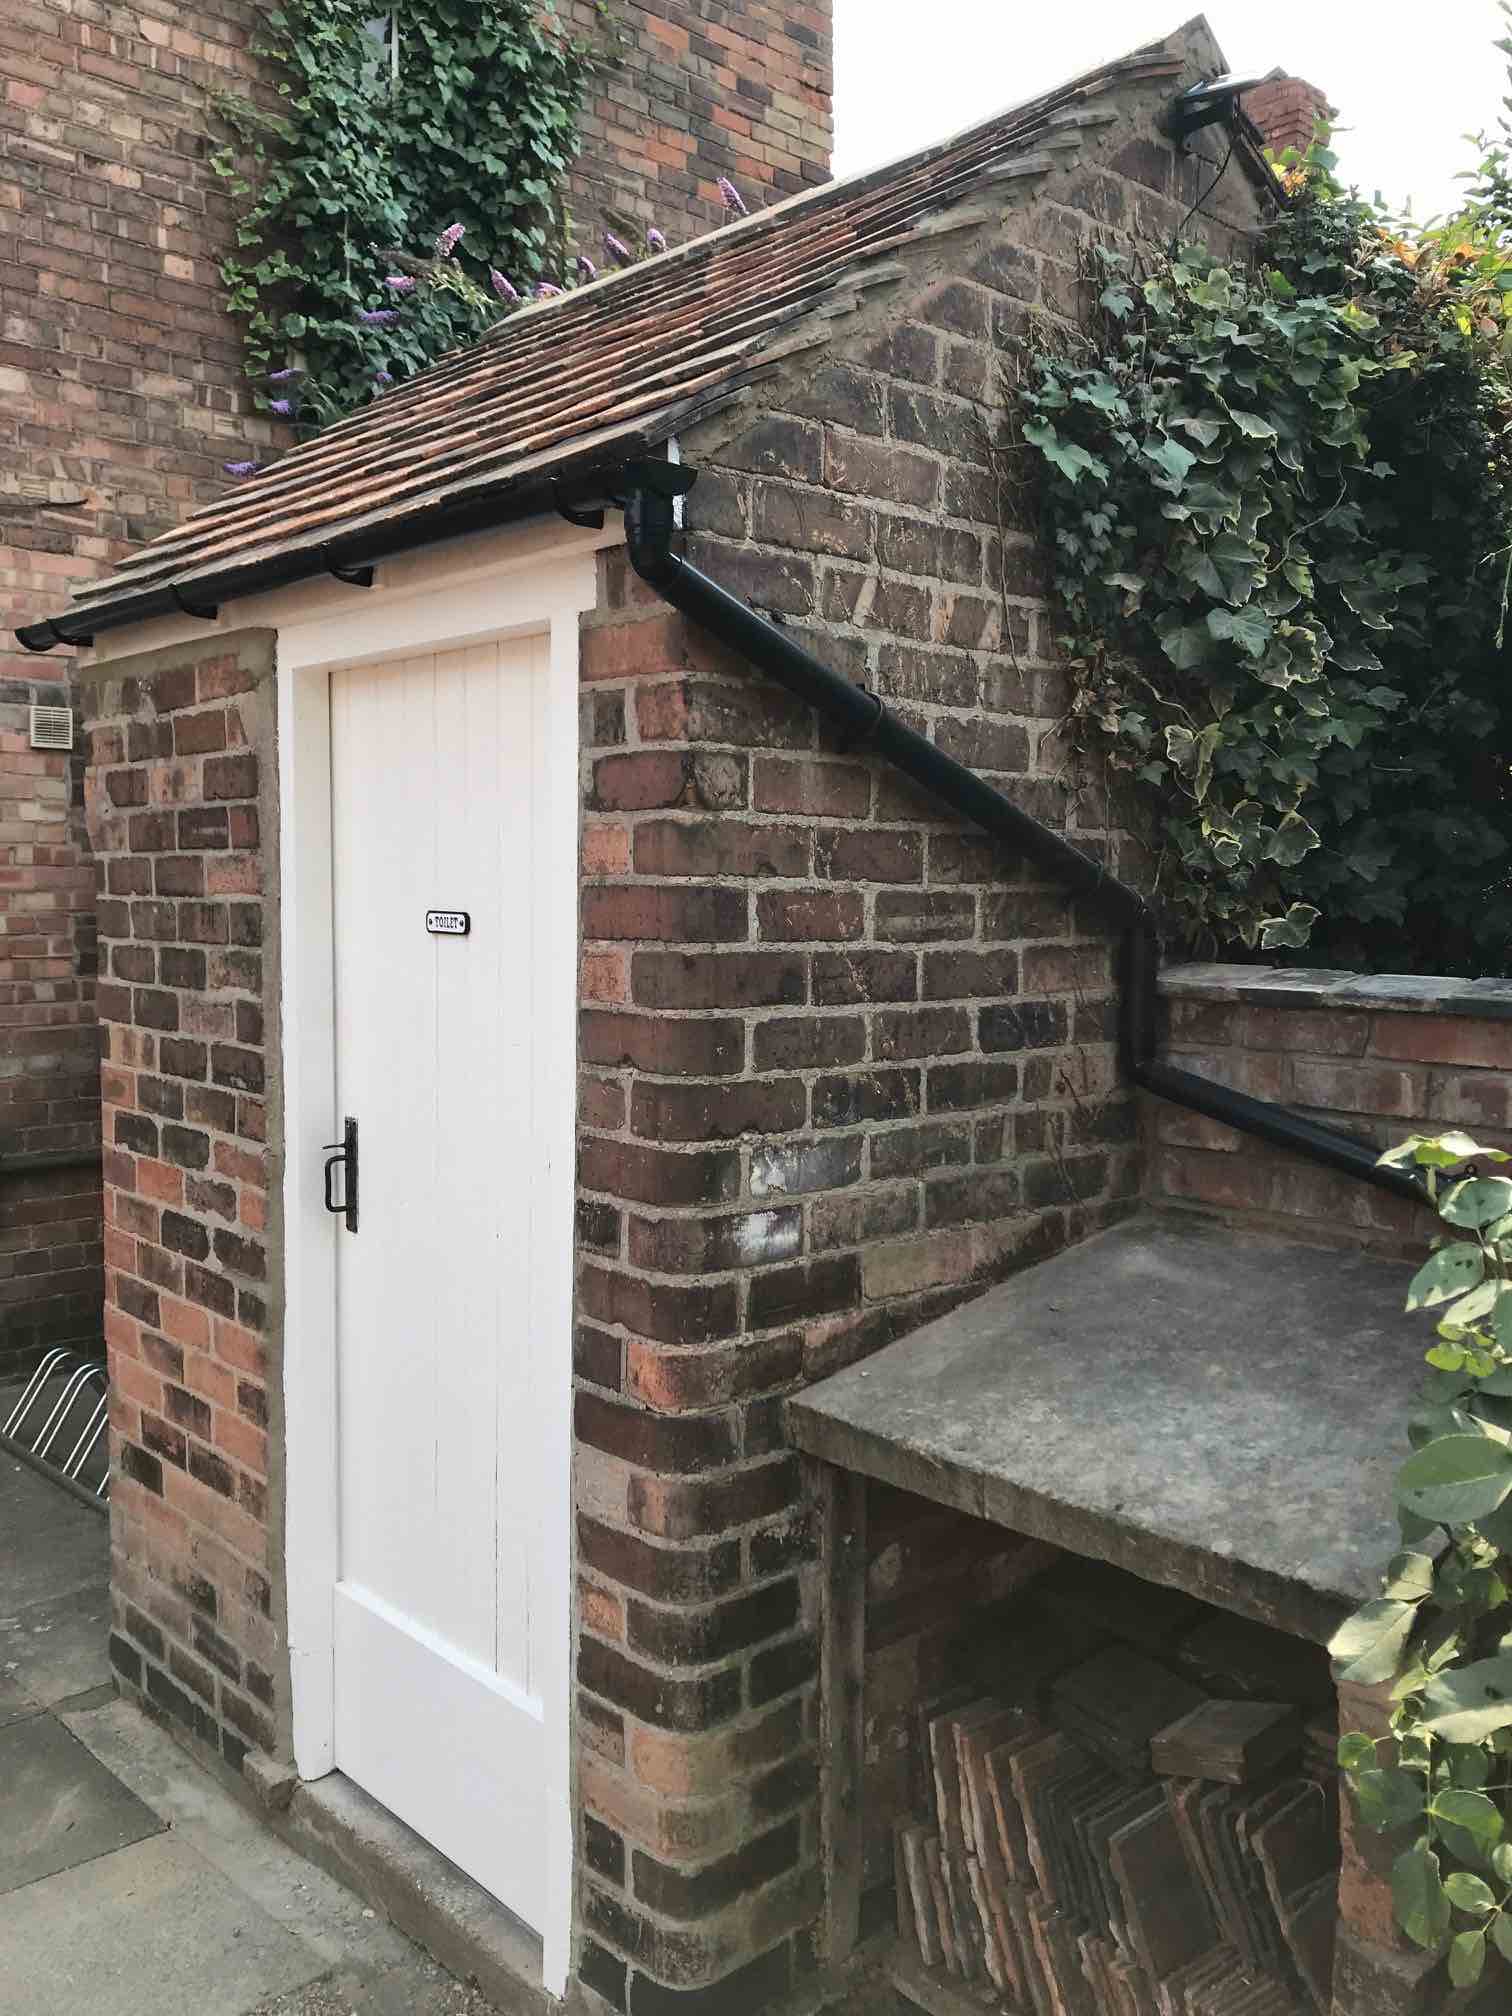 The re-roofed privy